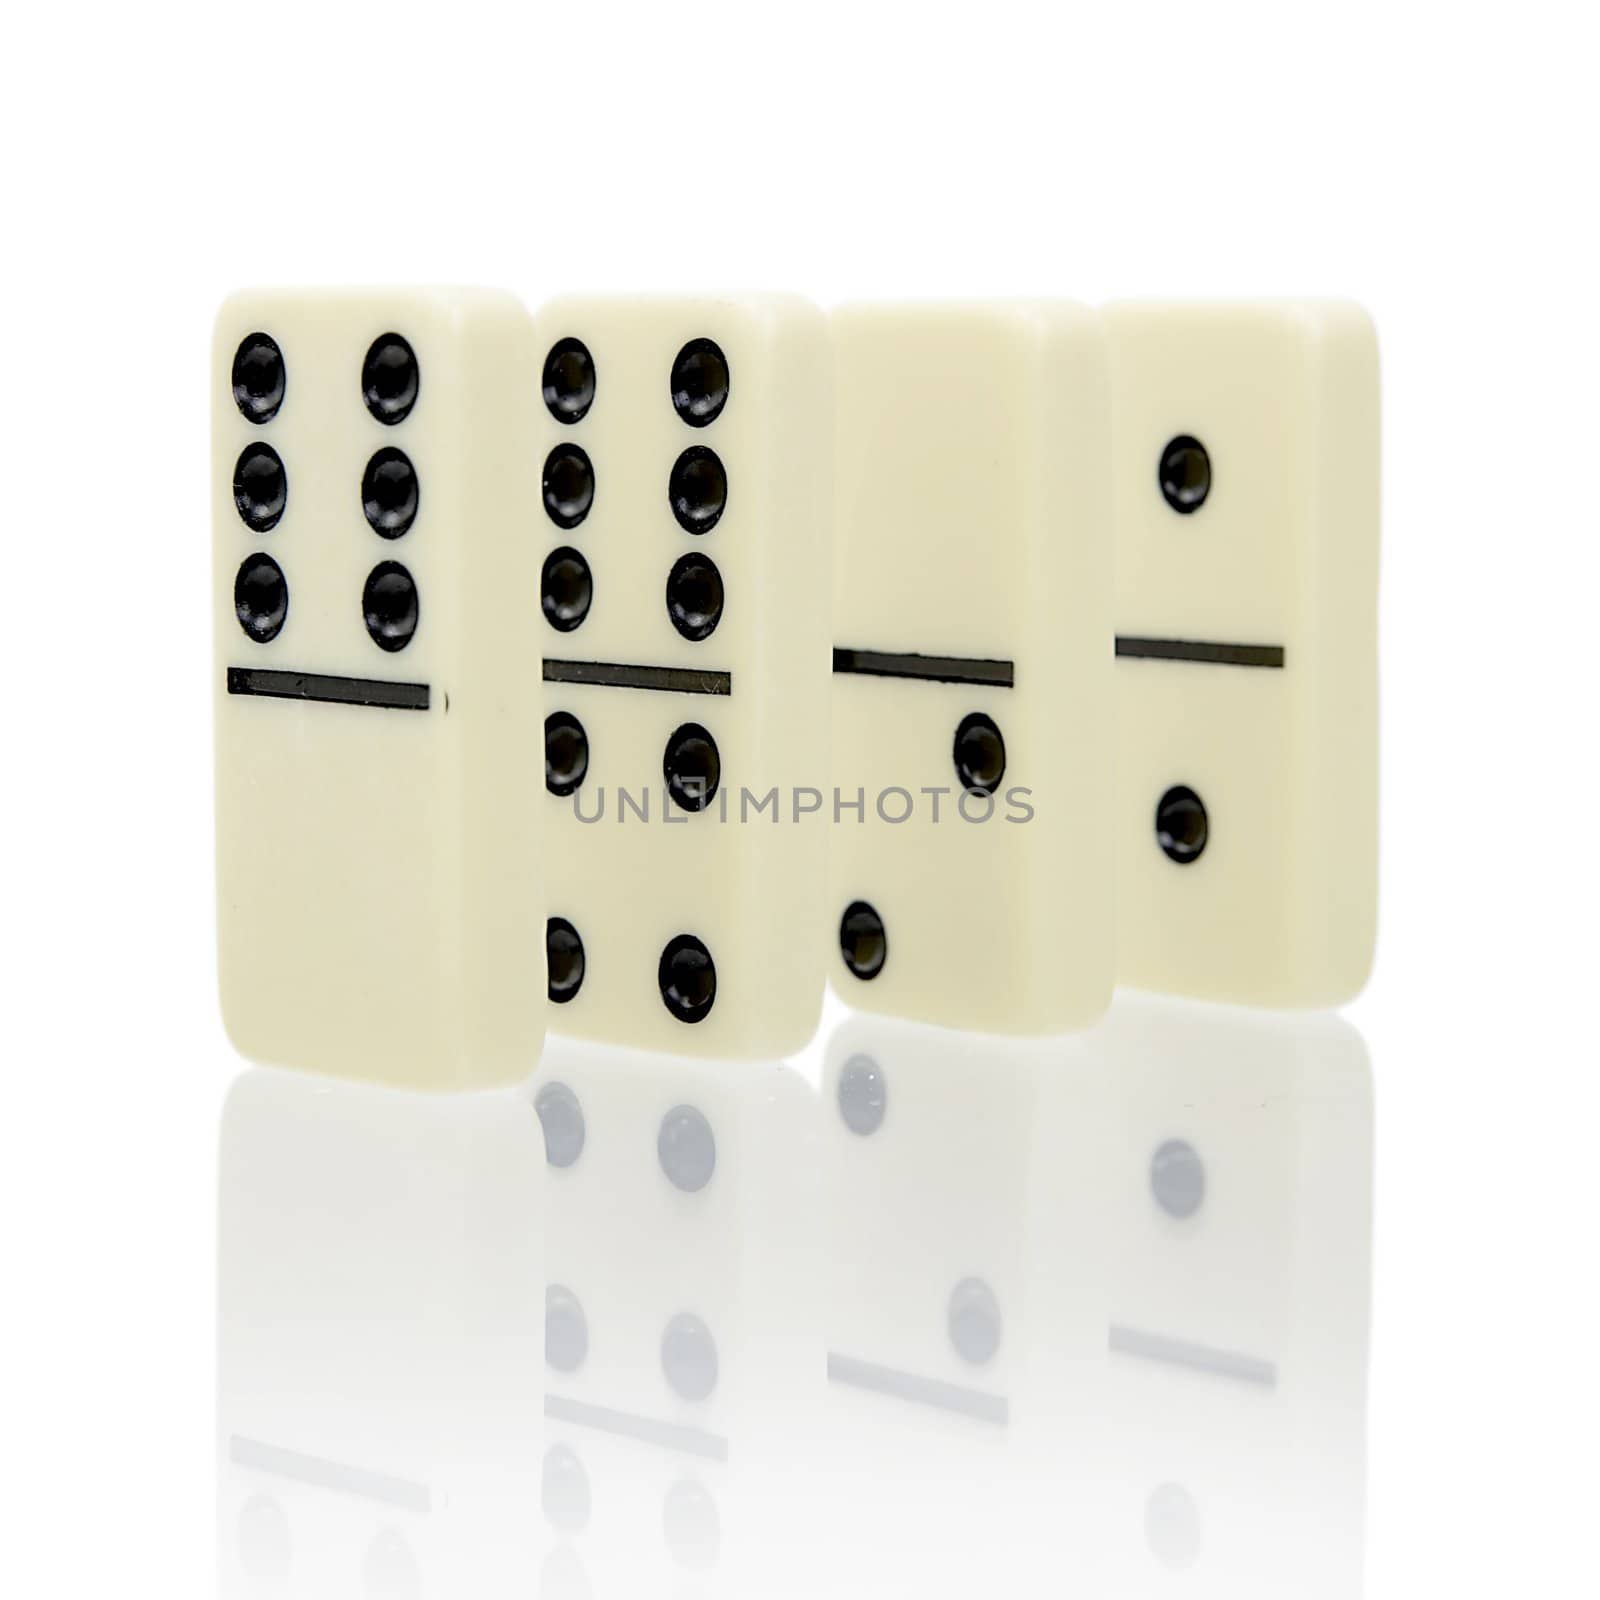 Four dominoes stand on a white background